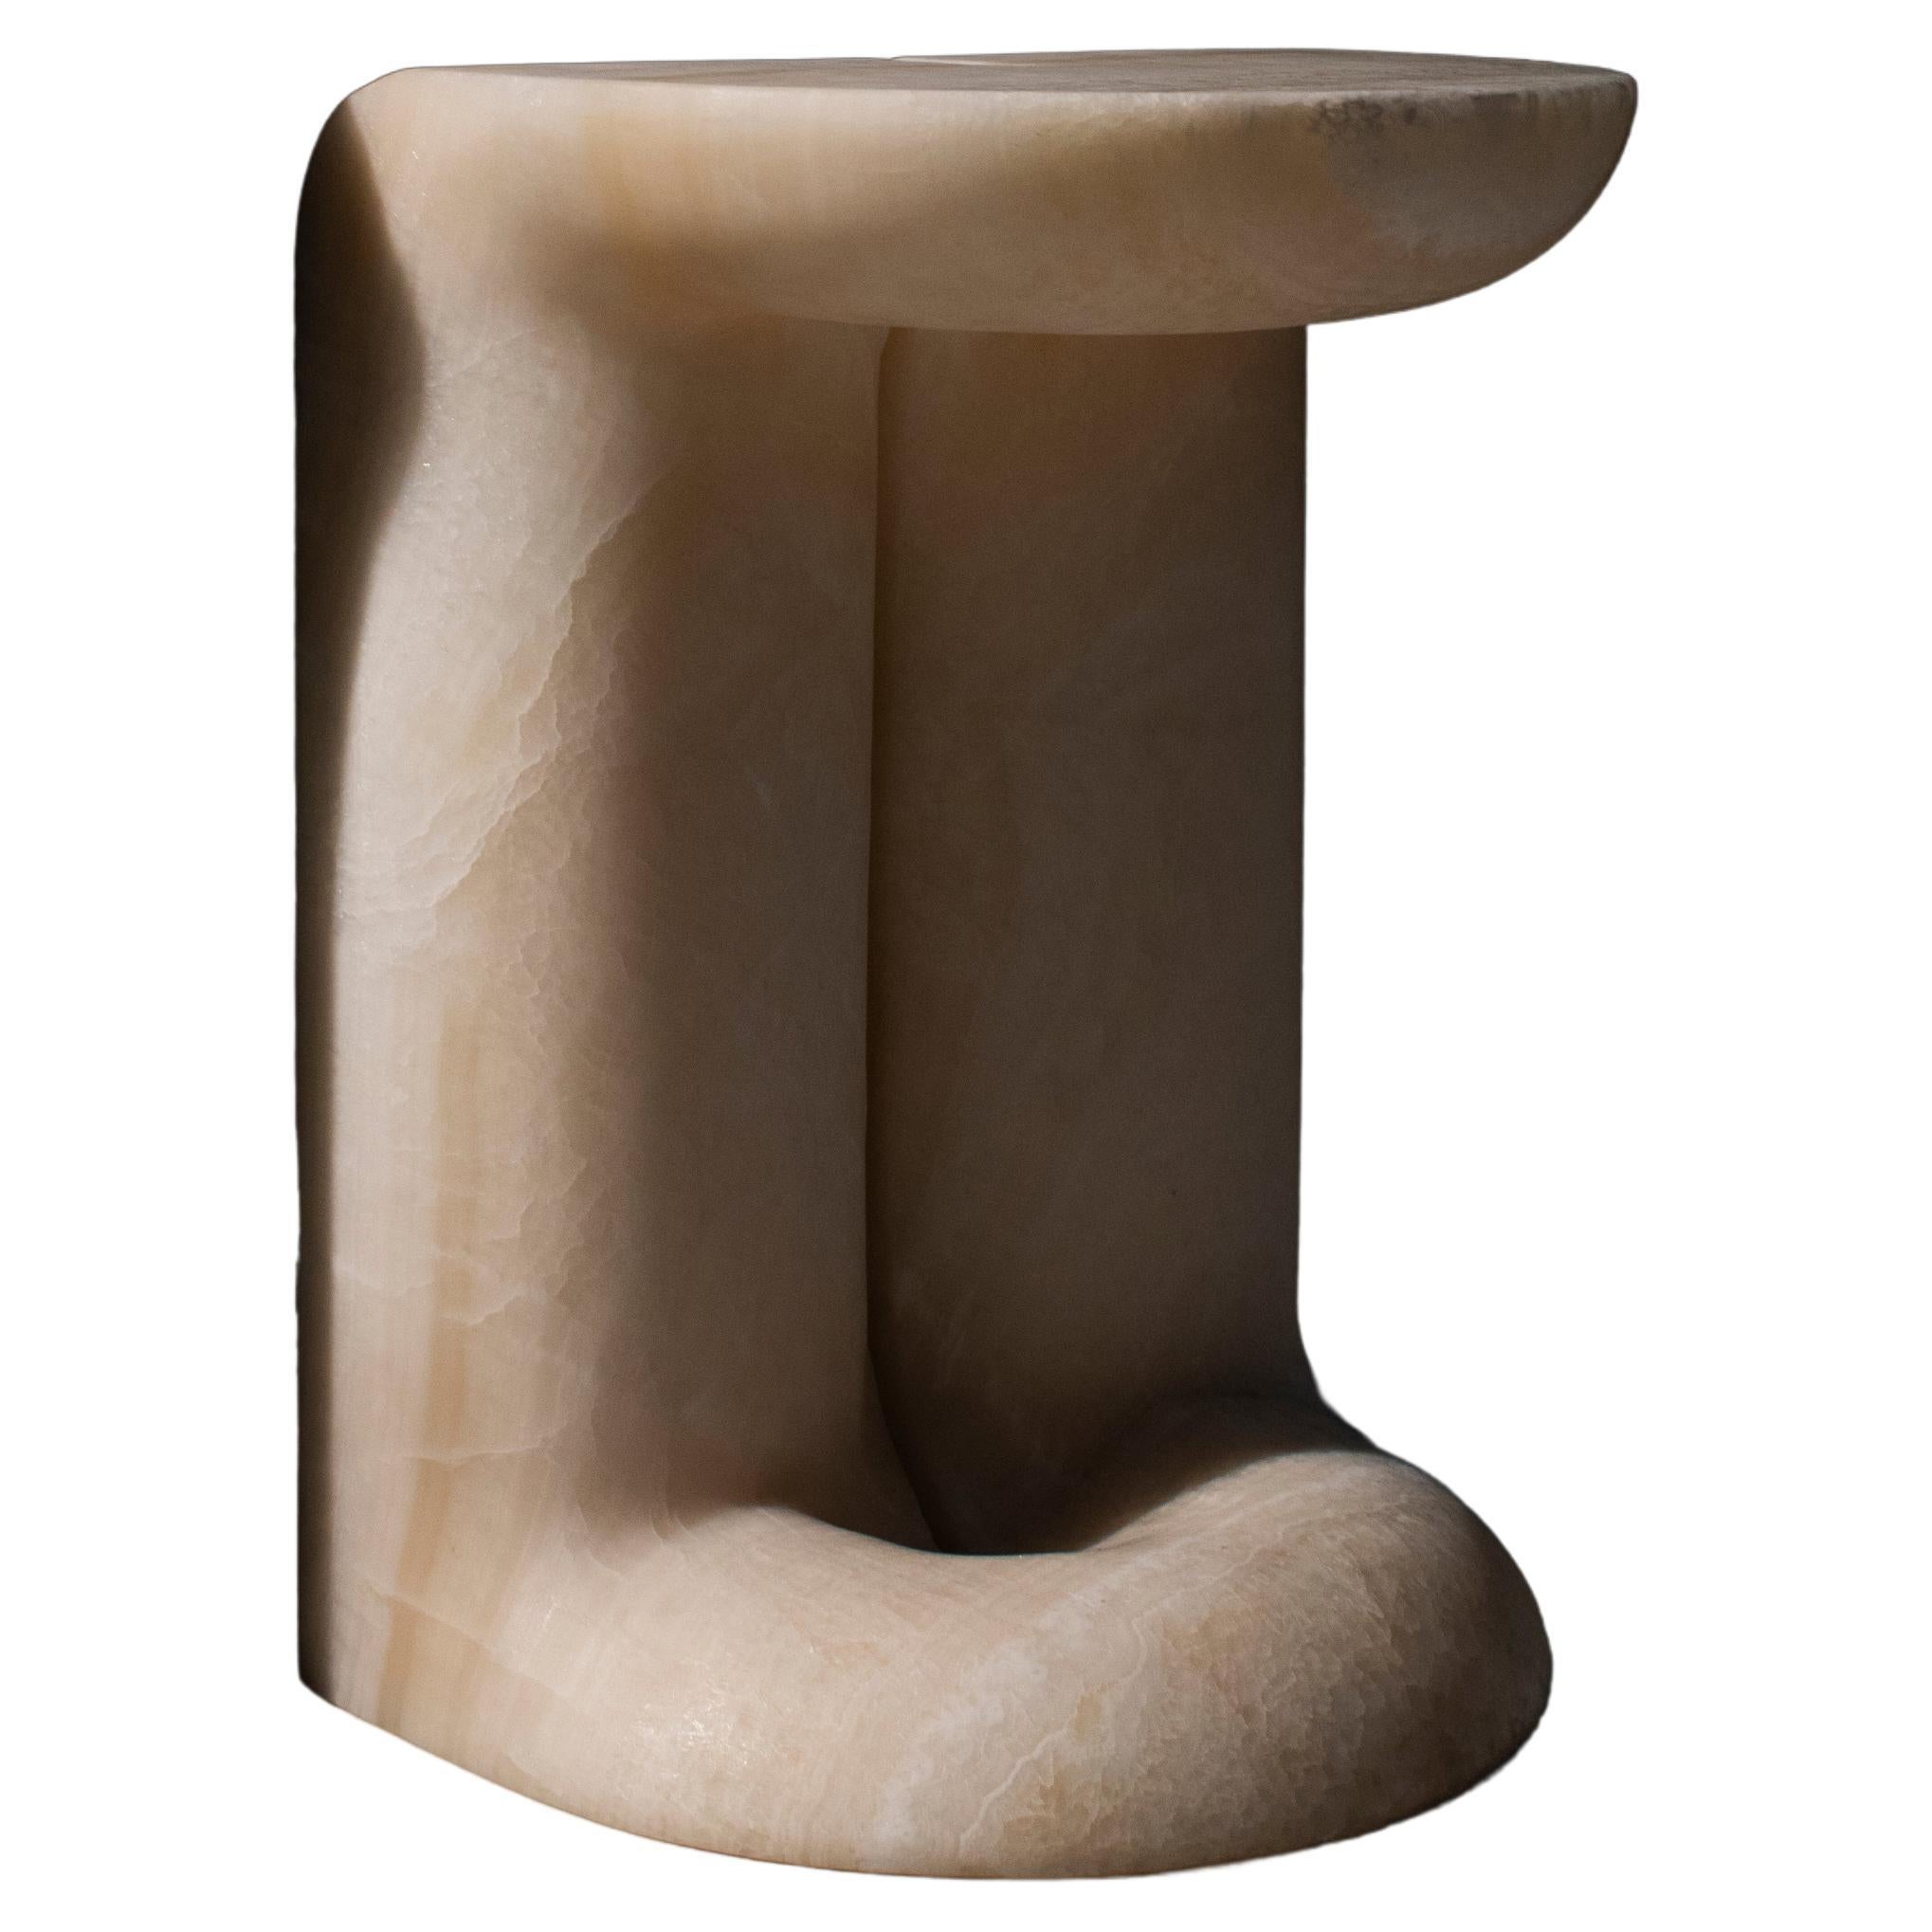 Mullunu onyx side table (2020) by Ian Felton 
Hand carved onyx 
40W x 33D x 55H cm standard size
15.5W x 13D x 26H in standard size
Limited Edition
Edition of 15
Custom color and size upon request

Mullunu onyx side table (2020) is the embodiment of